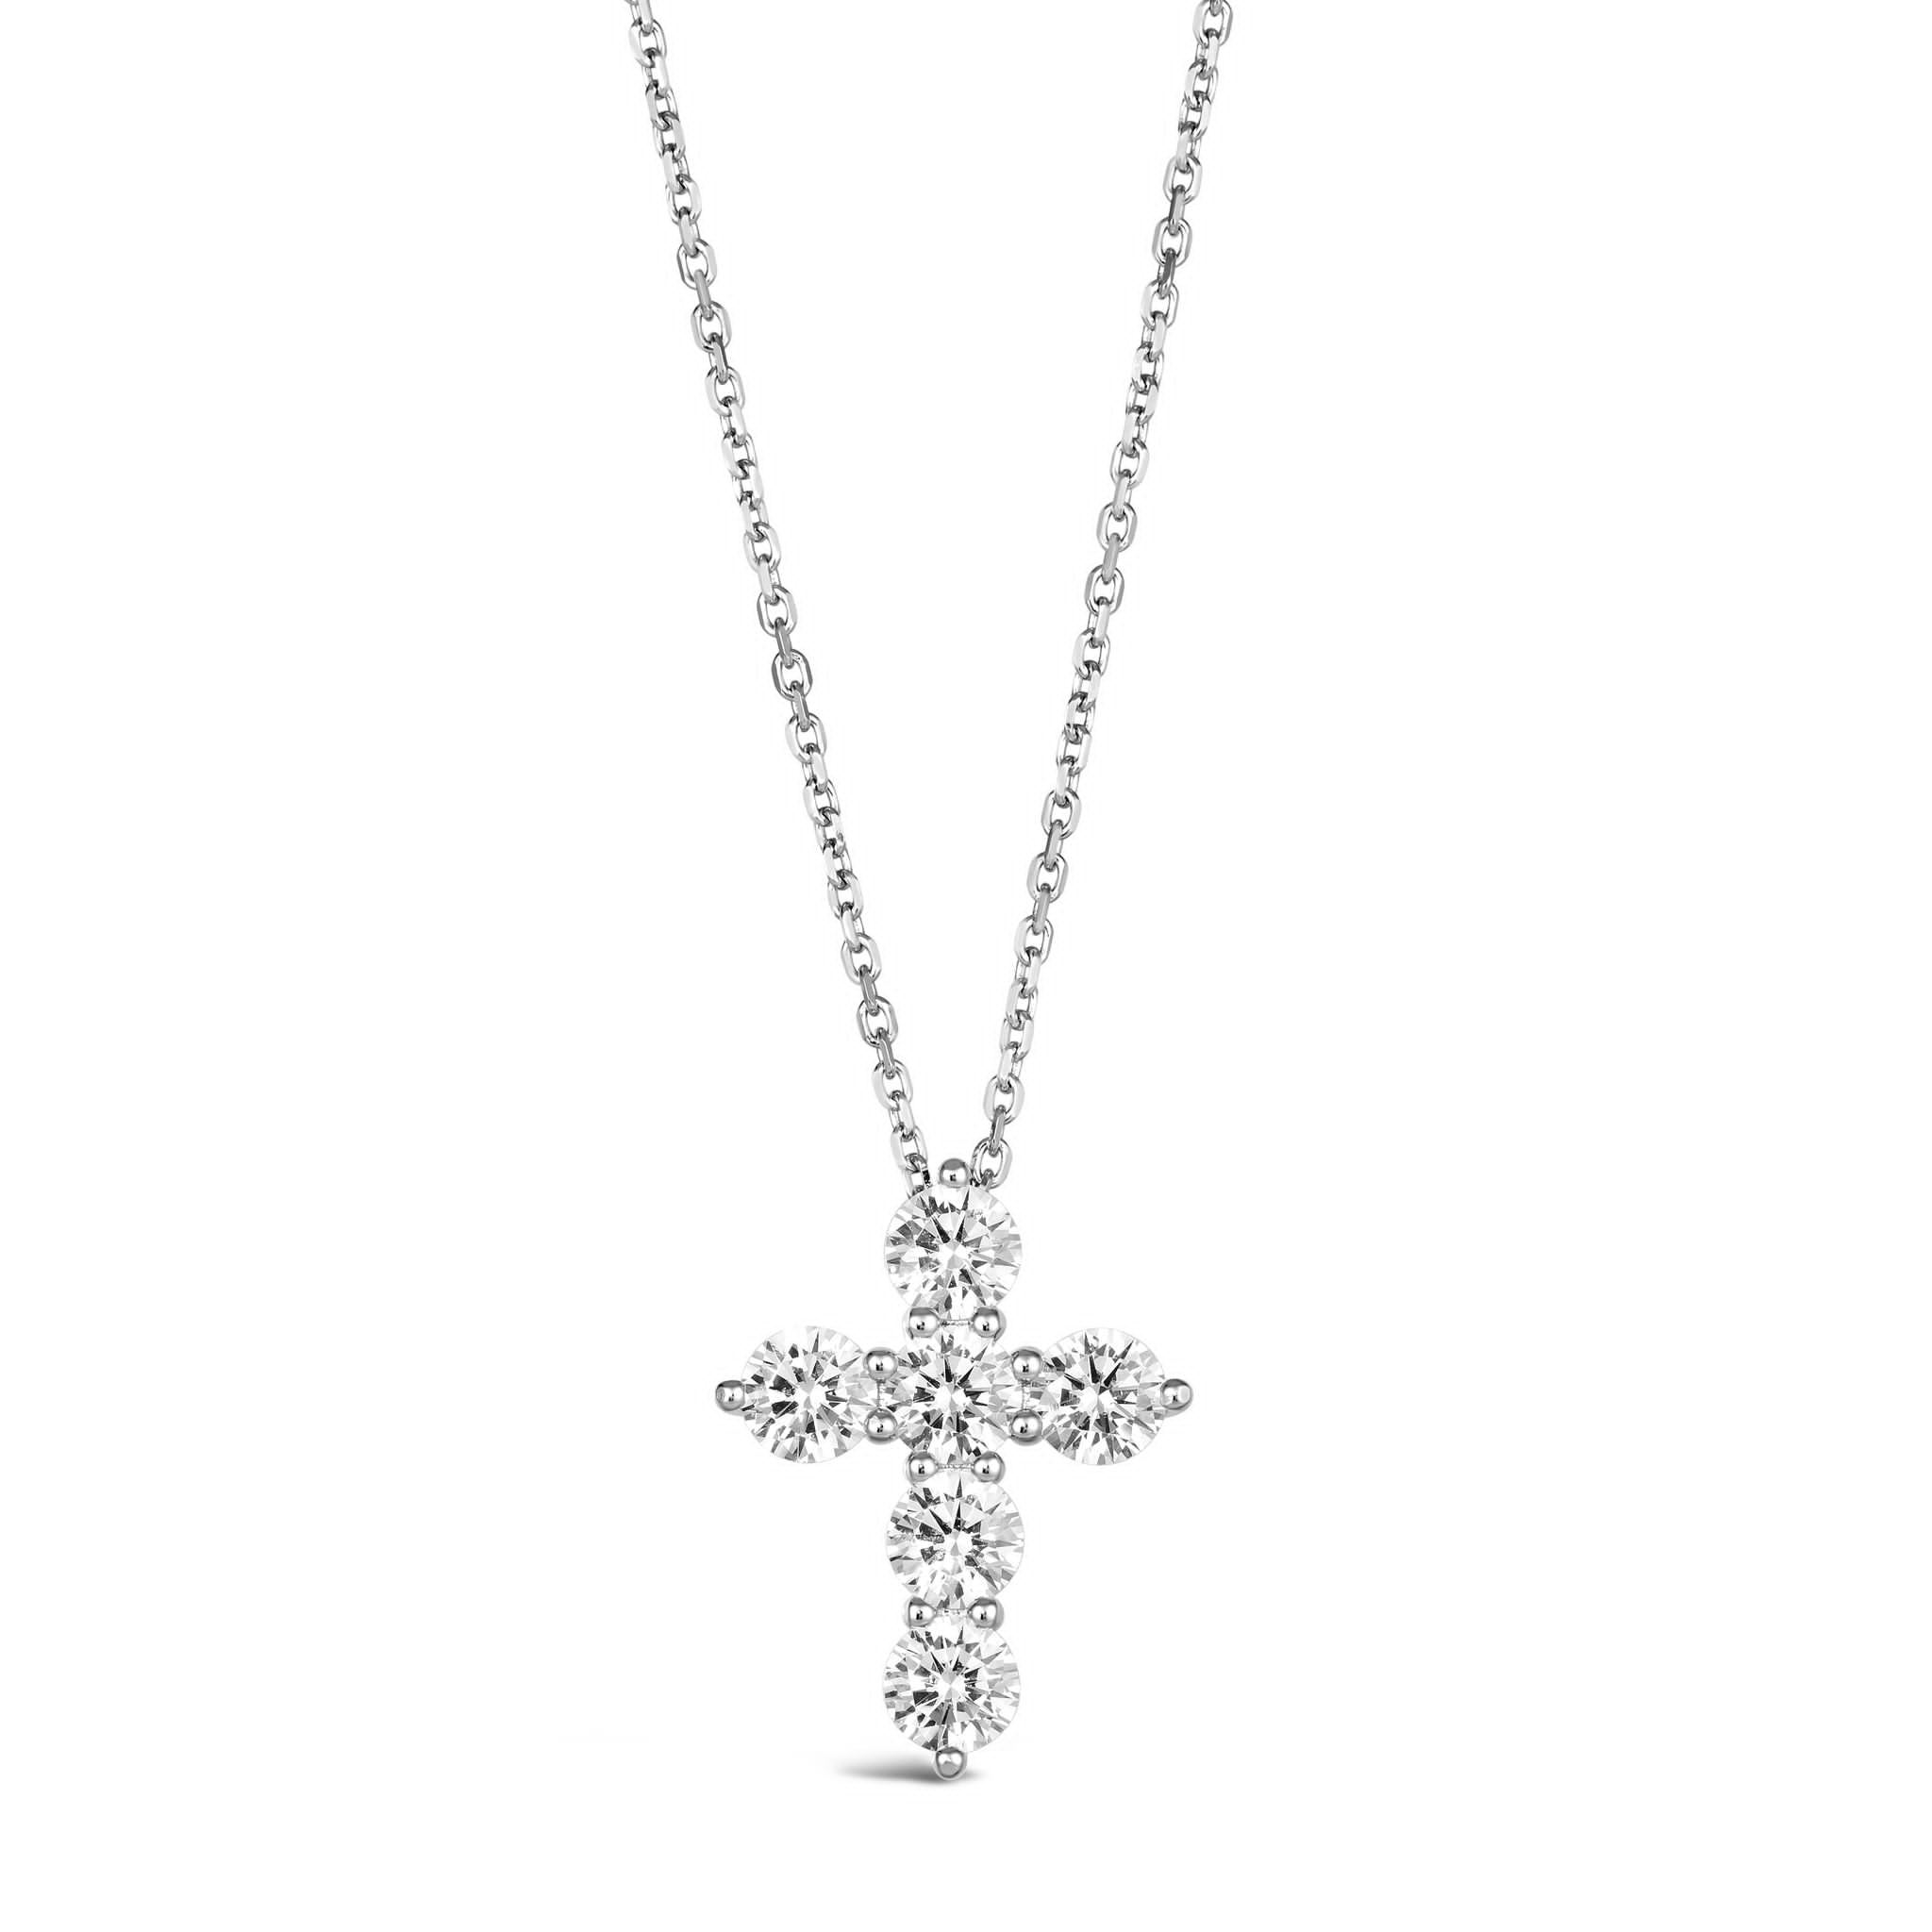 10K Yellow and White Gold Polished 3-Cross Necklace - Walmart.com